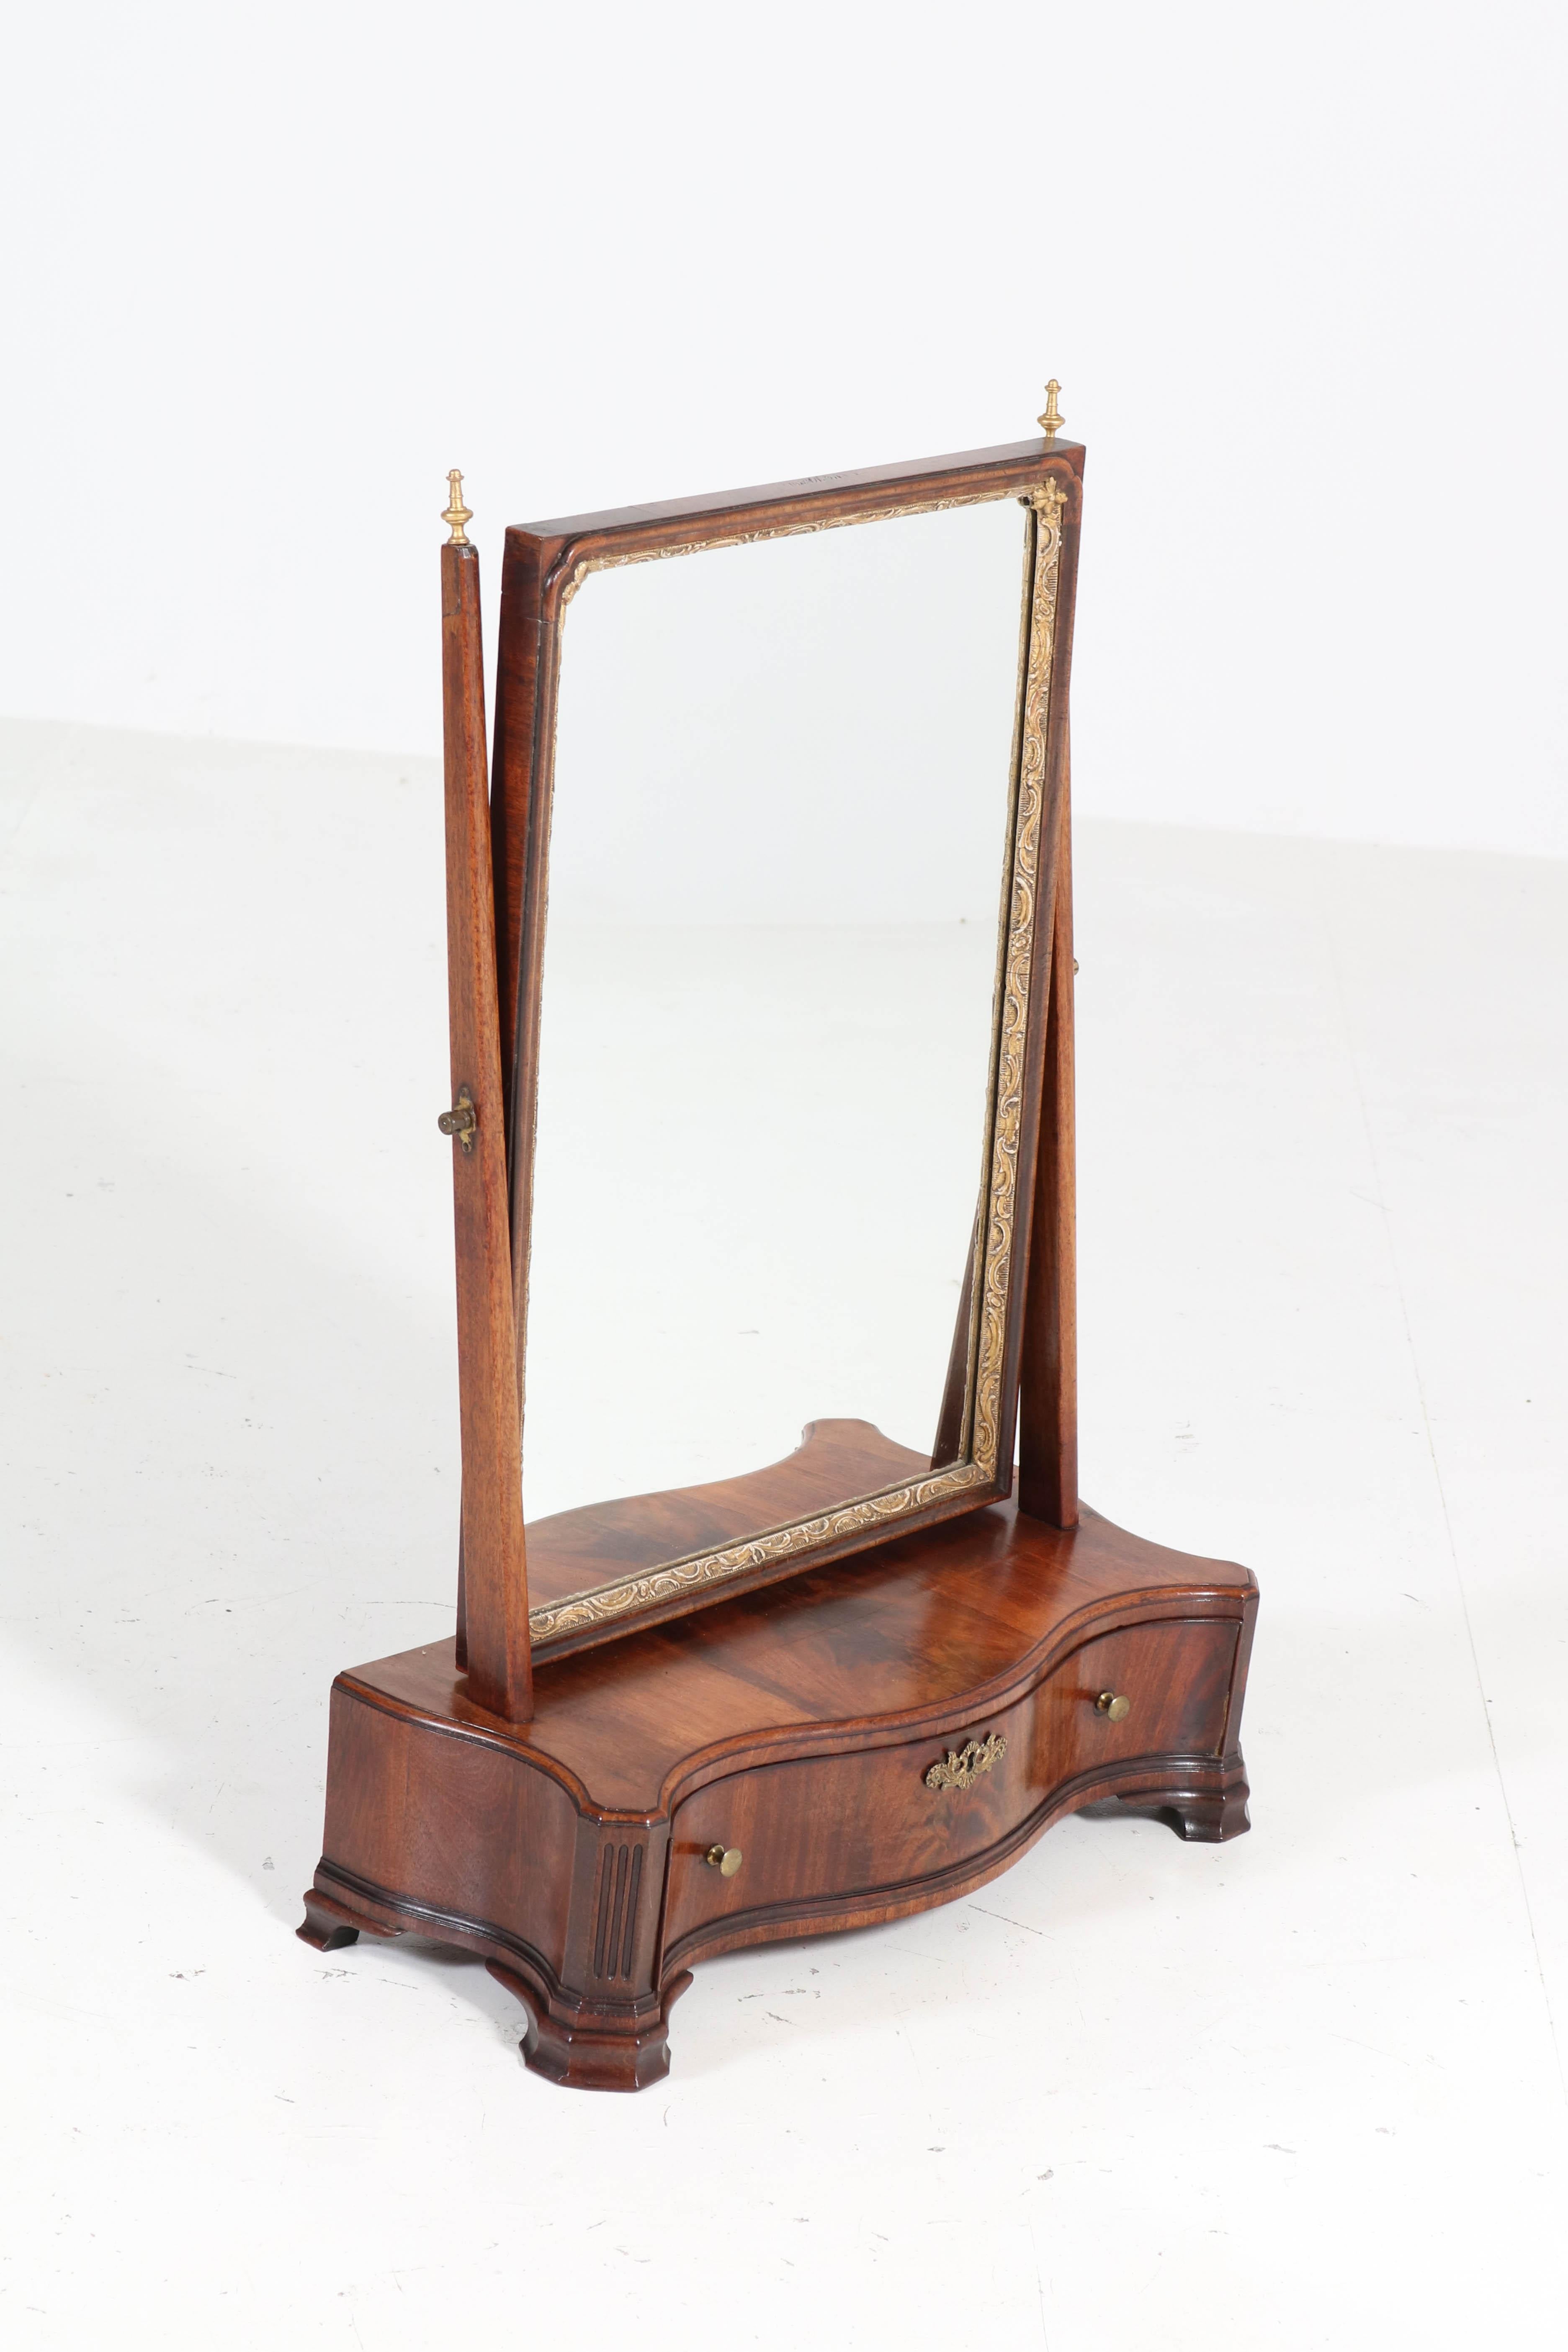 Wonderful Dutch Biedermeier table mirror or vanity.
Mahogany with gilt lining and original brass knobs.
The drawer has its original lock, see image.
This table mirror is in very good condition with minor wear consistent with
age and use,